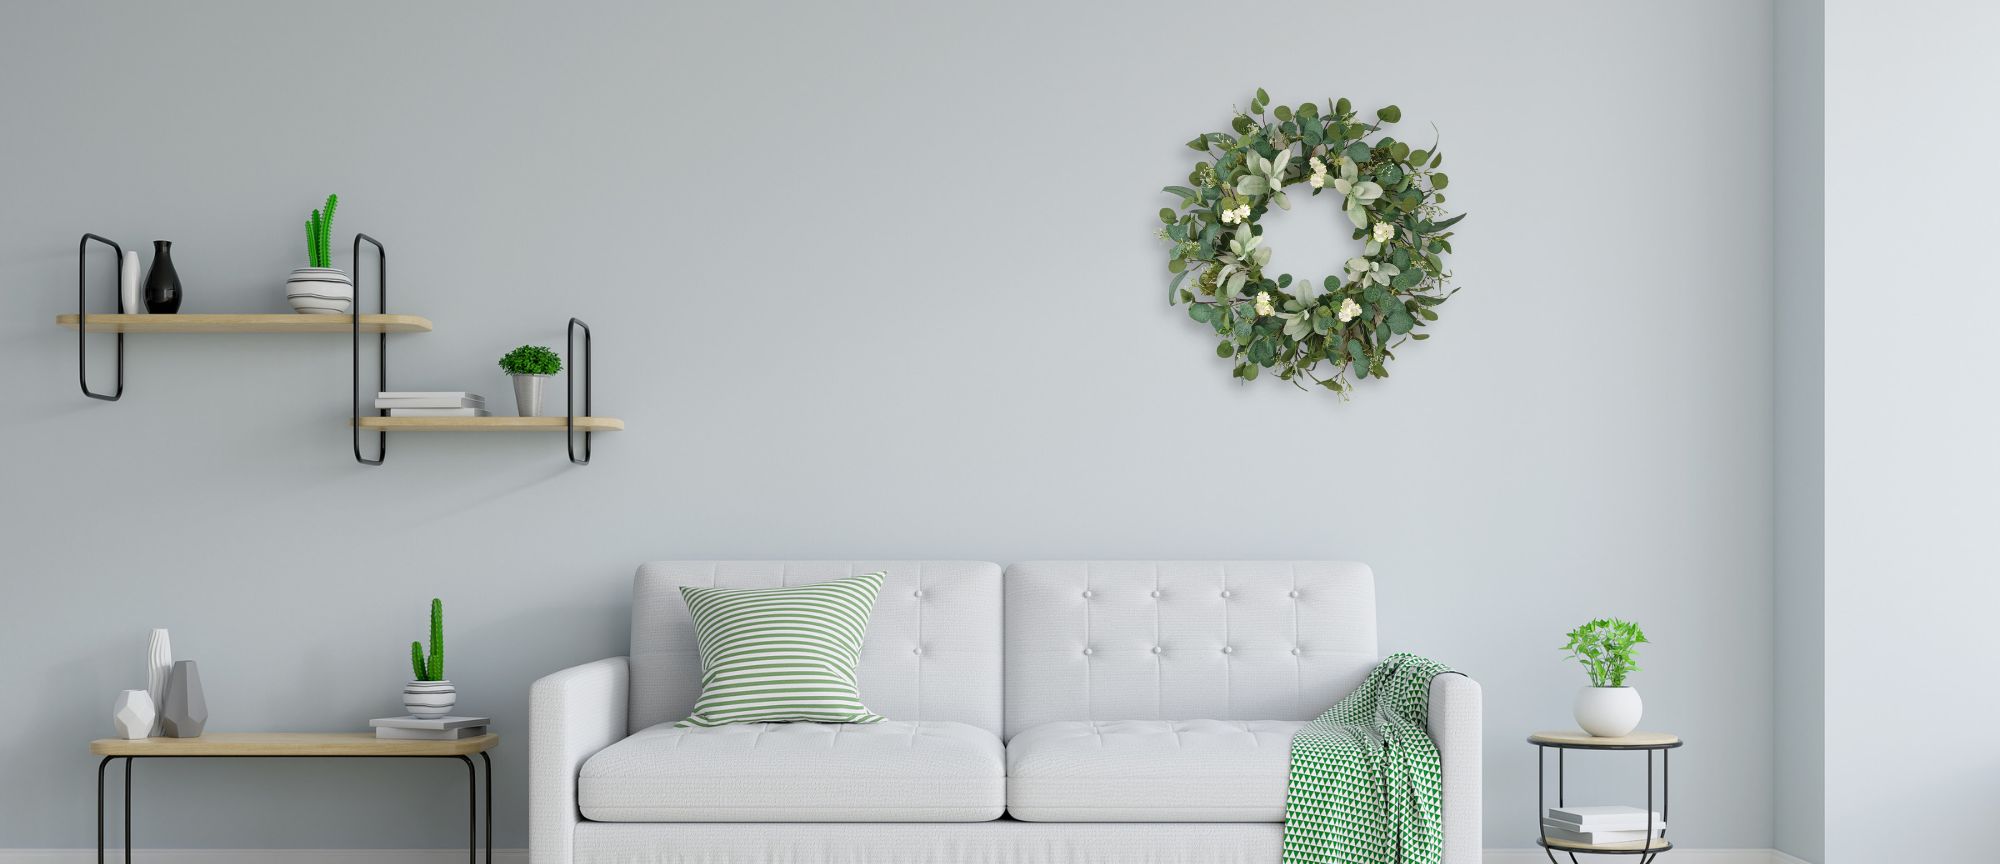 Design inspiration: How to incorporate artificial wreaths into your home decor - Tokcare Home